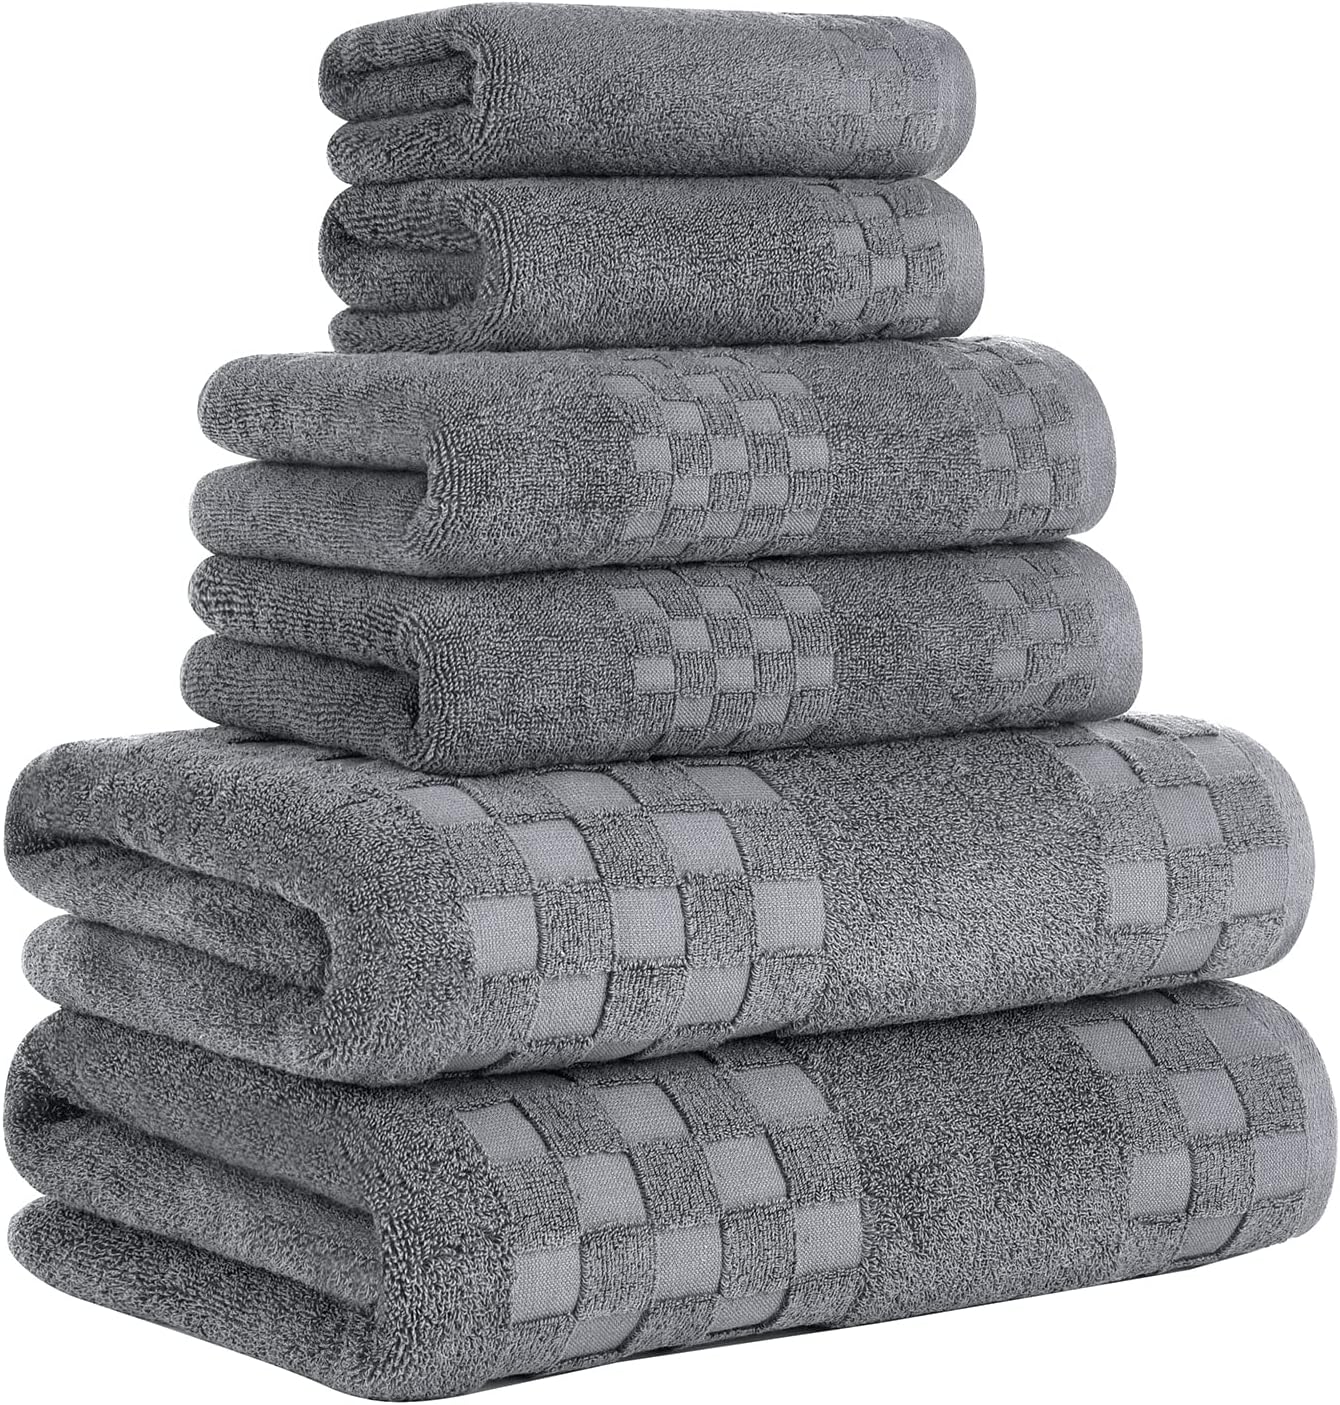 DIAOJIA Bath Towels Soft Cotton 6 Piece,100% Cotton Anti Odor Family Towels, Highly Absorbent Quick-Drying Lightweight Spa Towel for Bathroom 2 Bath Towel 2 Washcloth 2 Hand Towel (Cool Grey)